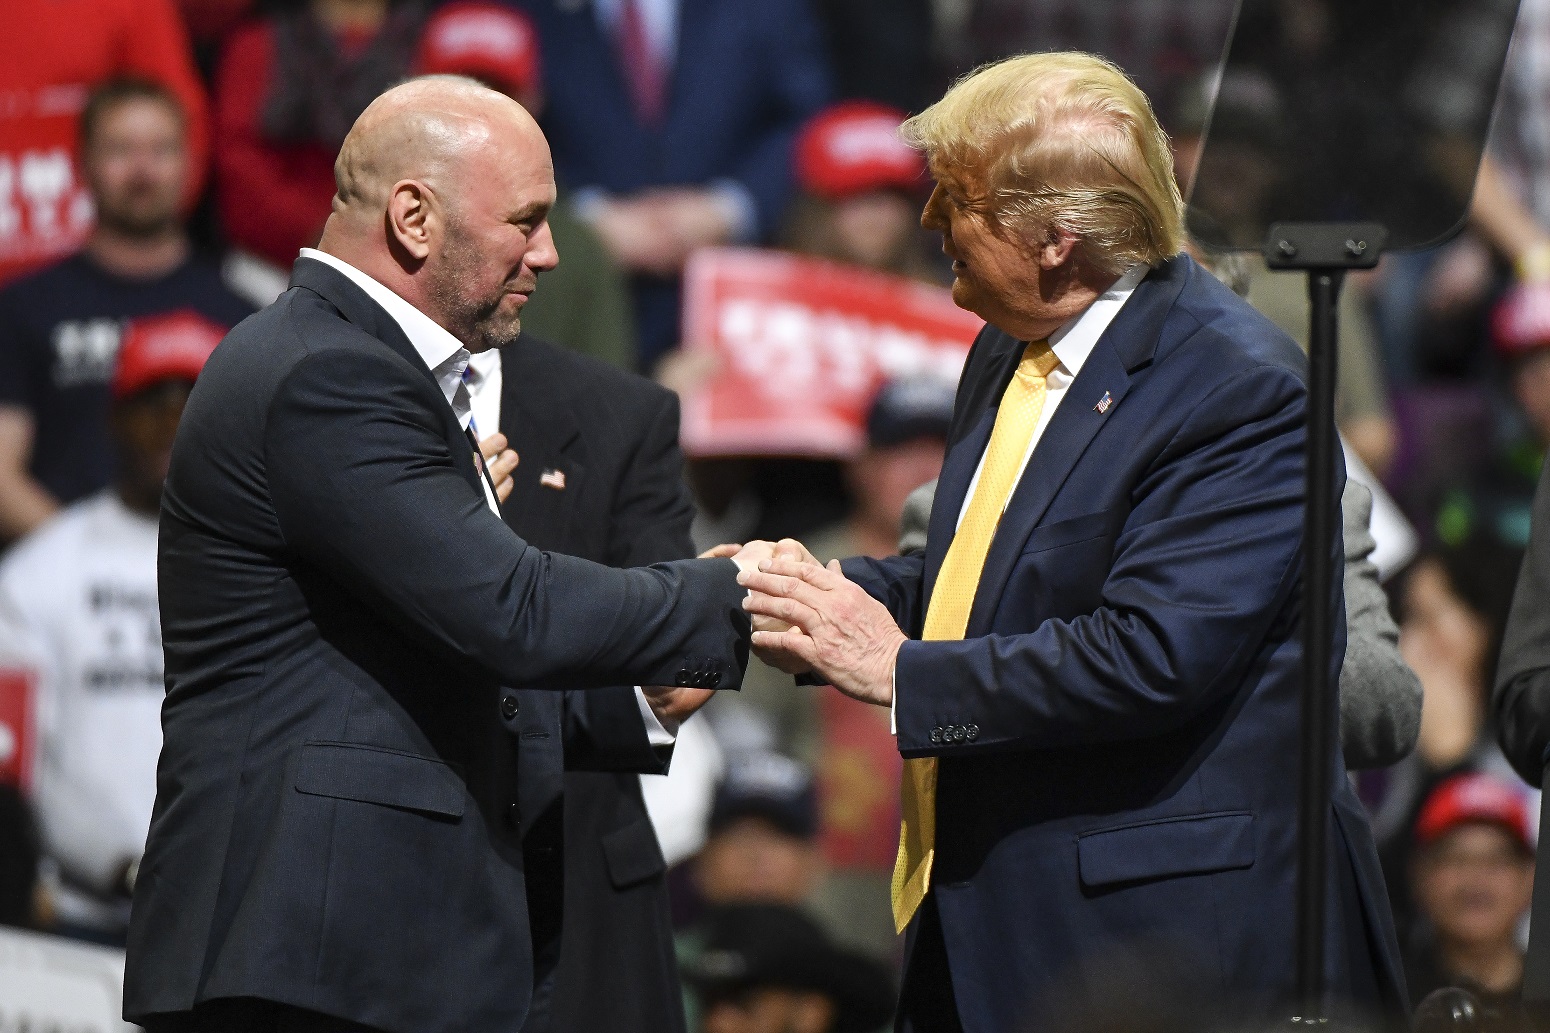 Donald Trump Just Got the Ultimate Support from Dana White